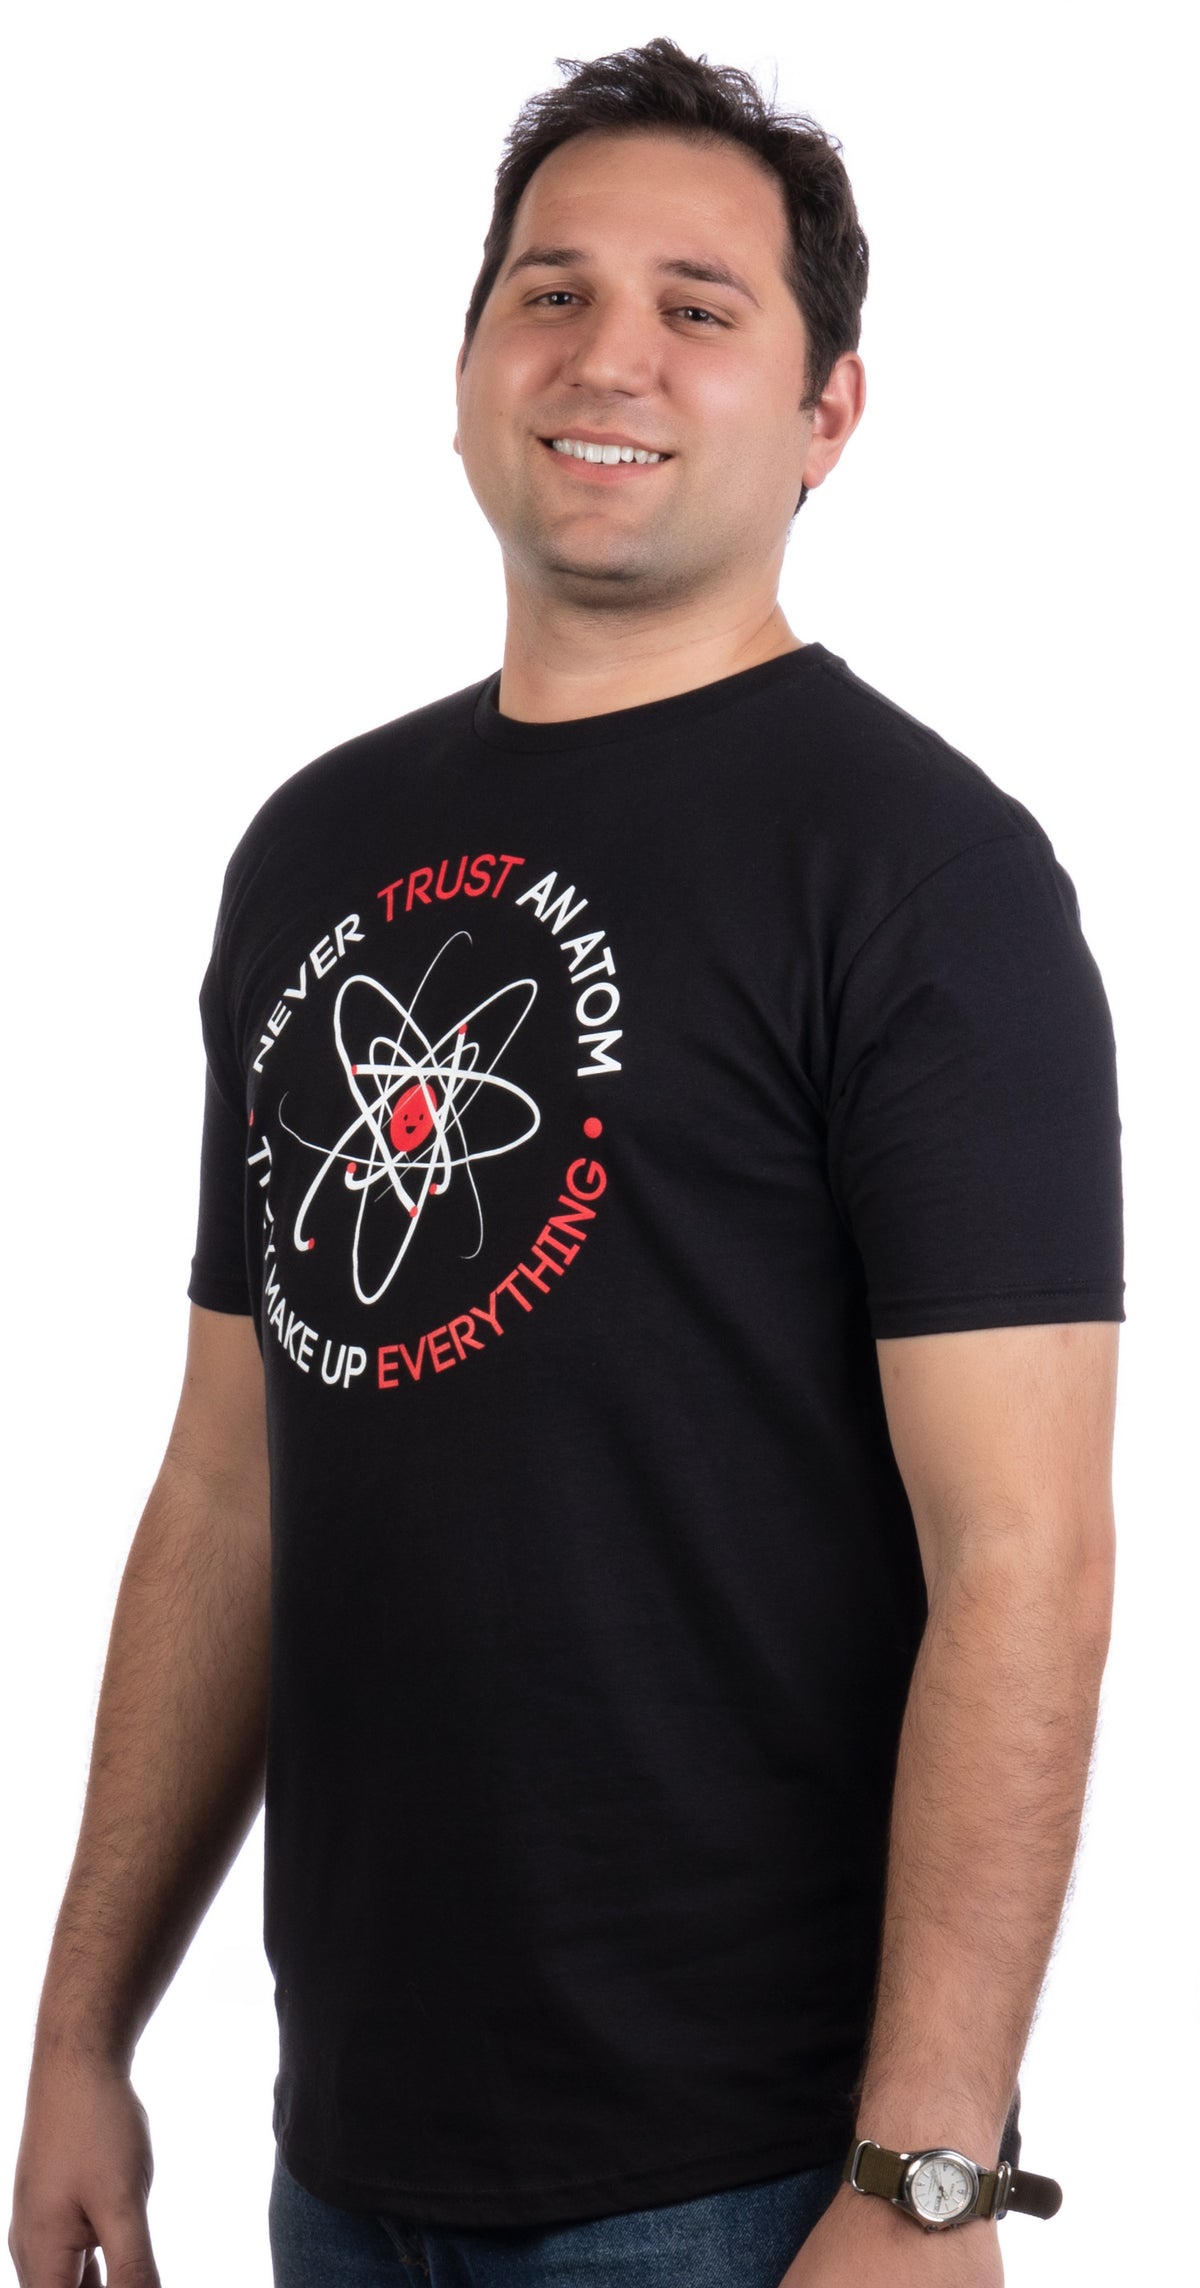 Tall Tee: Never Trust an Atom, they Make Up Everything | Funny Science T-shirt